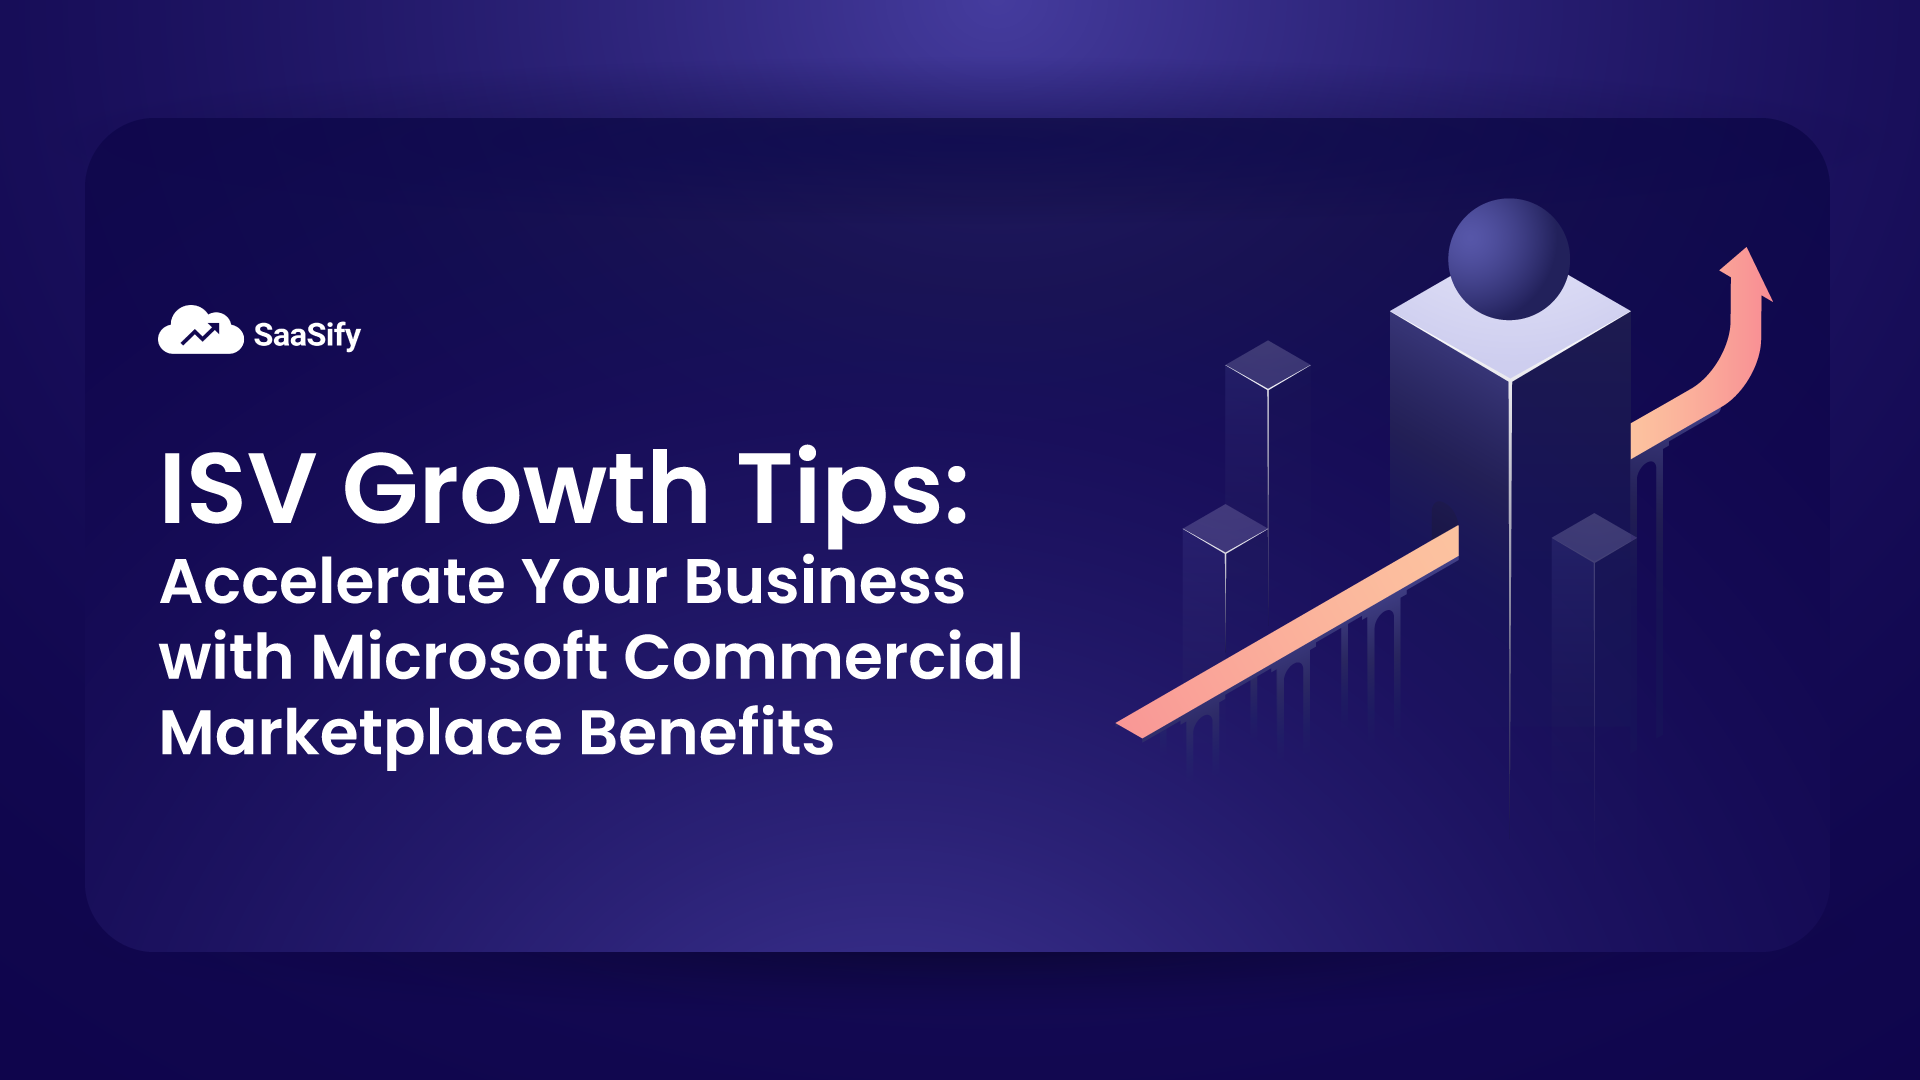 ISV Growth Tips: Accelerate Your Business with Microsoft Commercial Marketplace Benefits